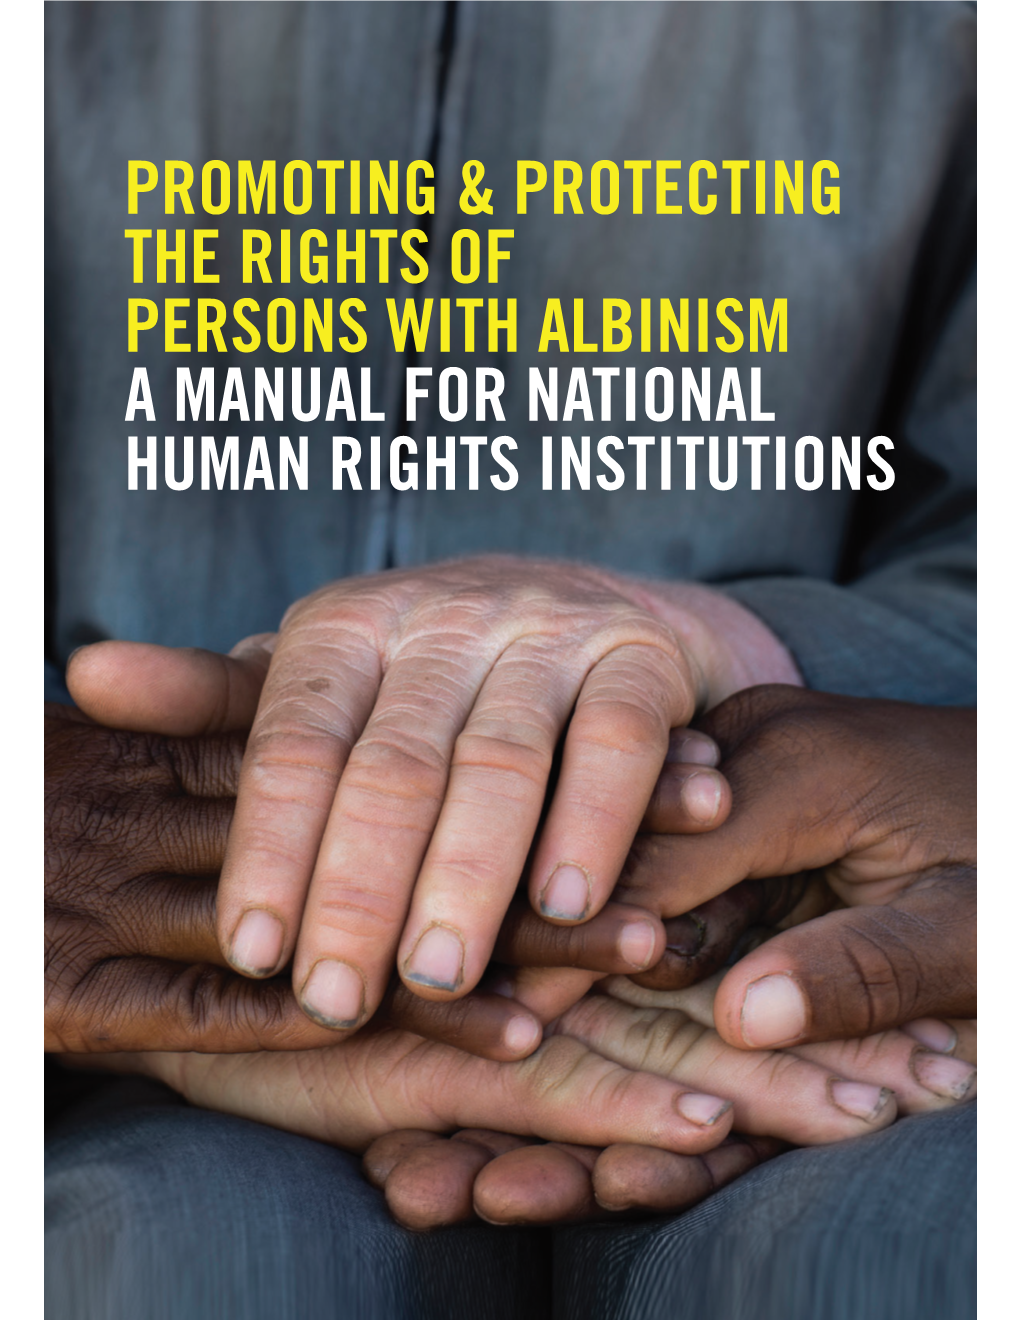 Promoting & Protecting the Rights of Persons with Albinism